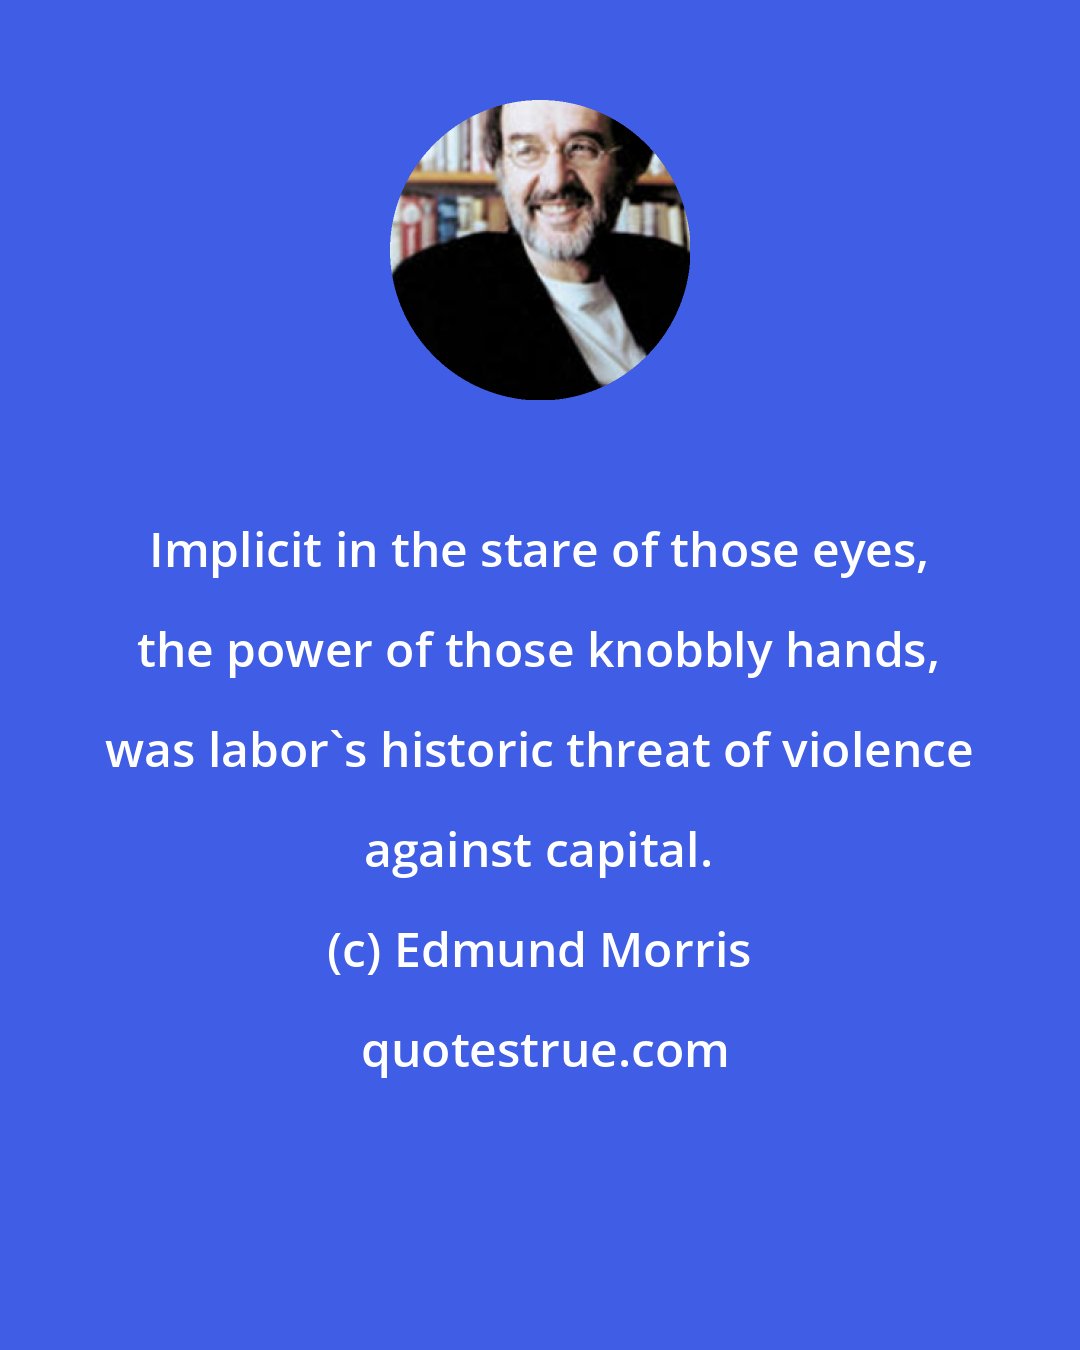 Edmund Morris: Implicit in the stare of those eyes, the power of those knobbly hands, was labor's historic threat of violence against capital.